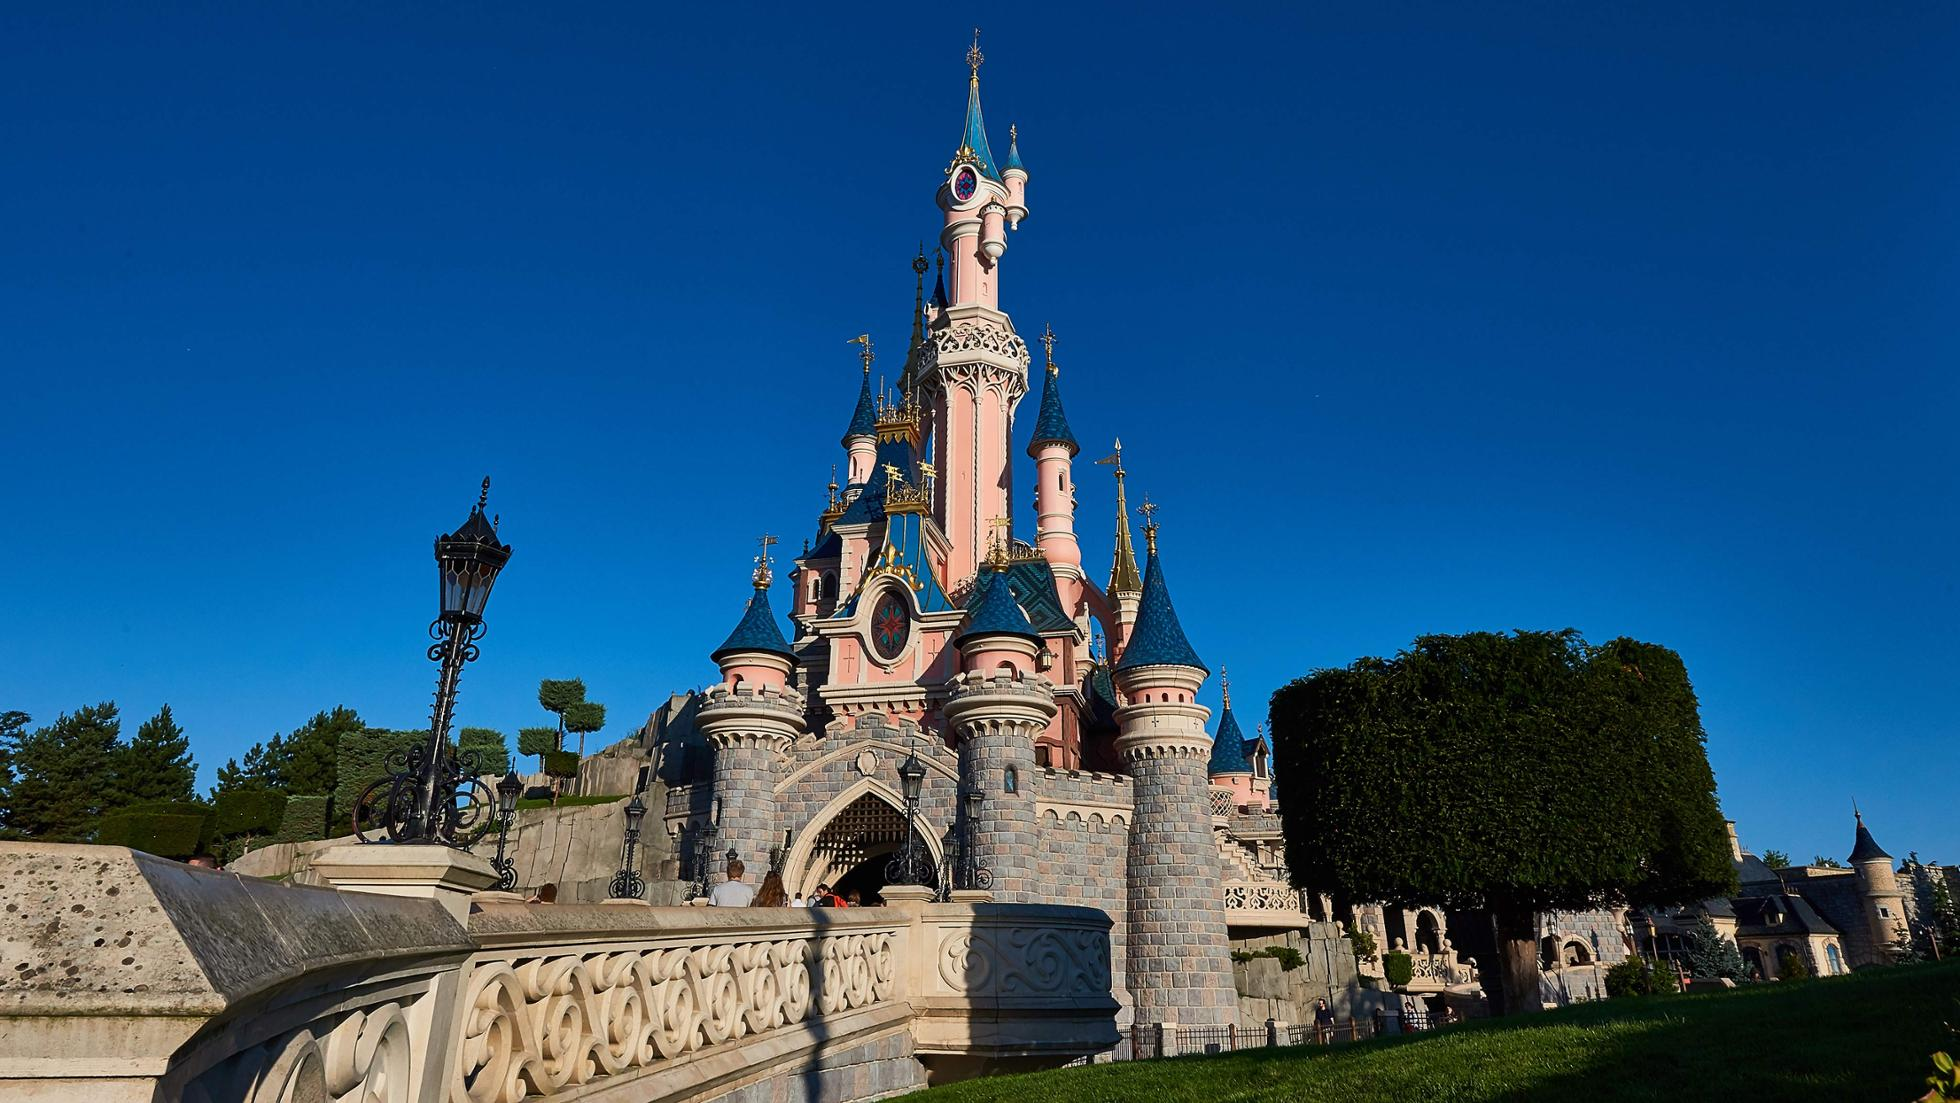 Disneyland Paris January Park Hours Released, Earlier Extra Magic Time